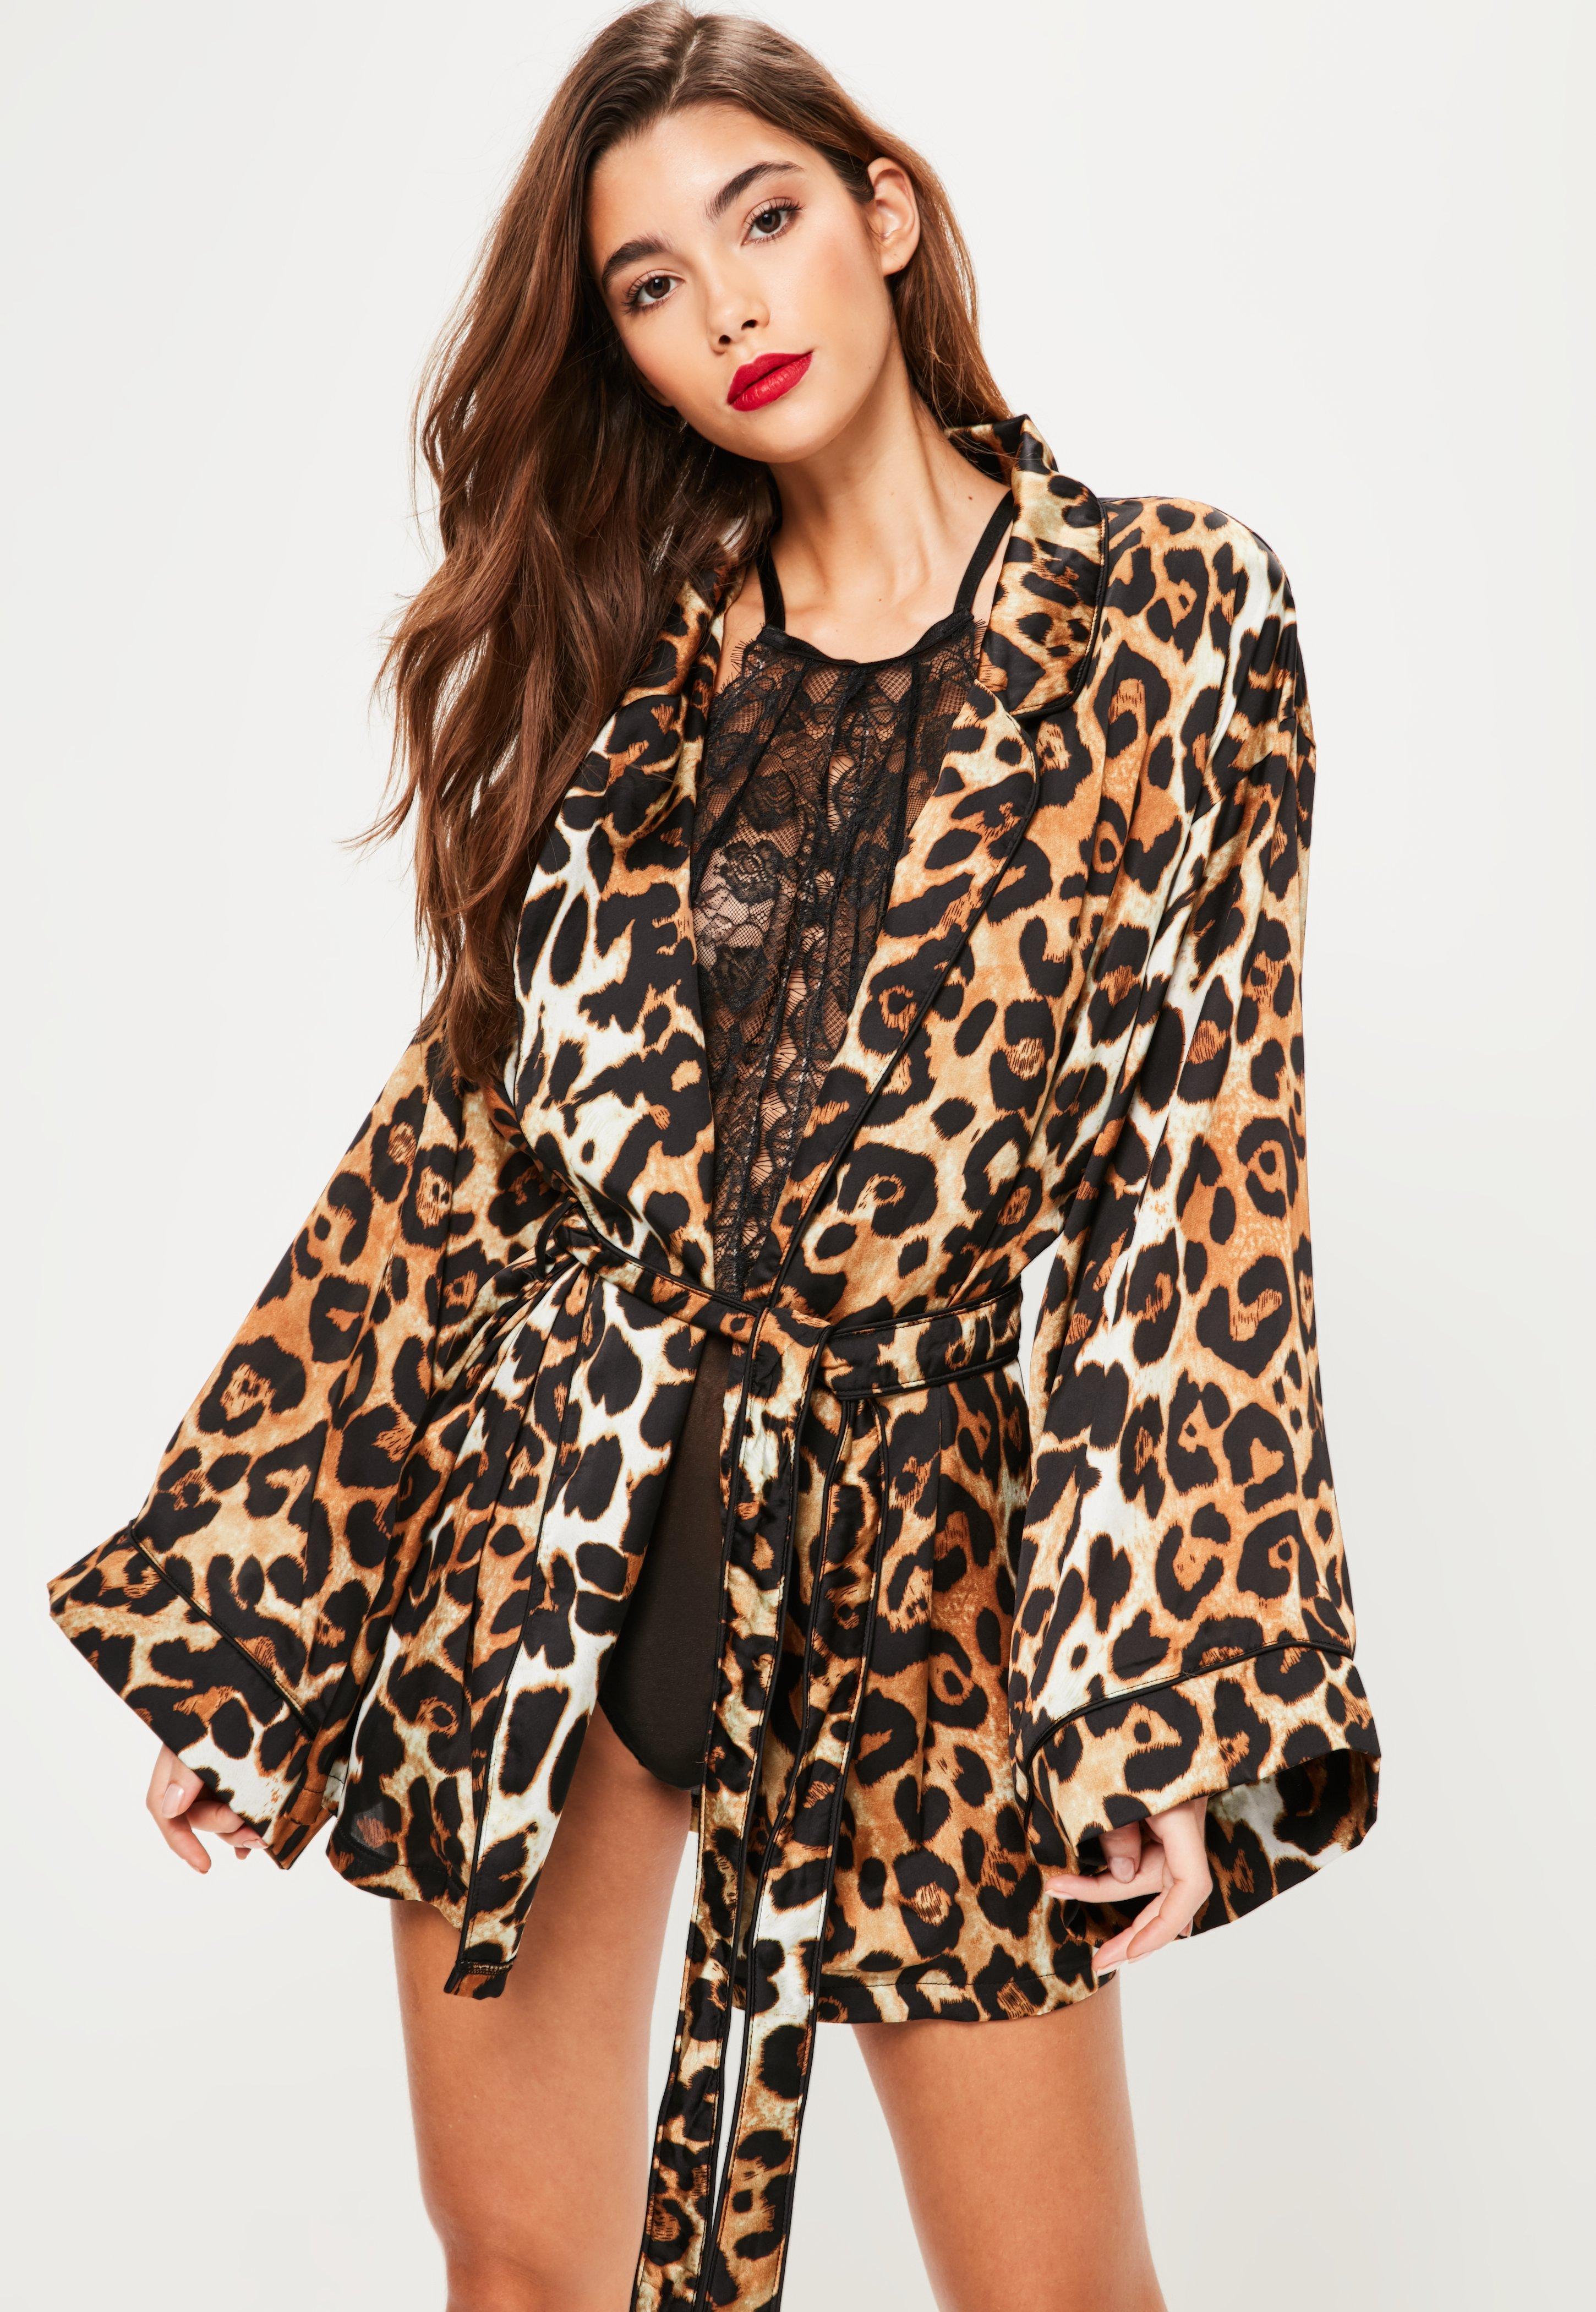 Lyst - Missguided Brown Leopard Print Kimono Robe in Brown